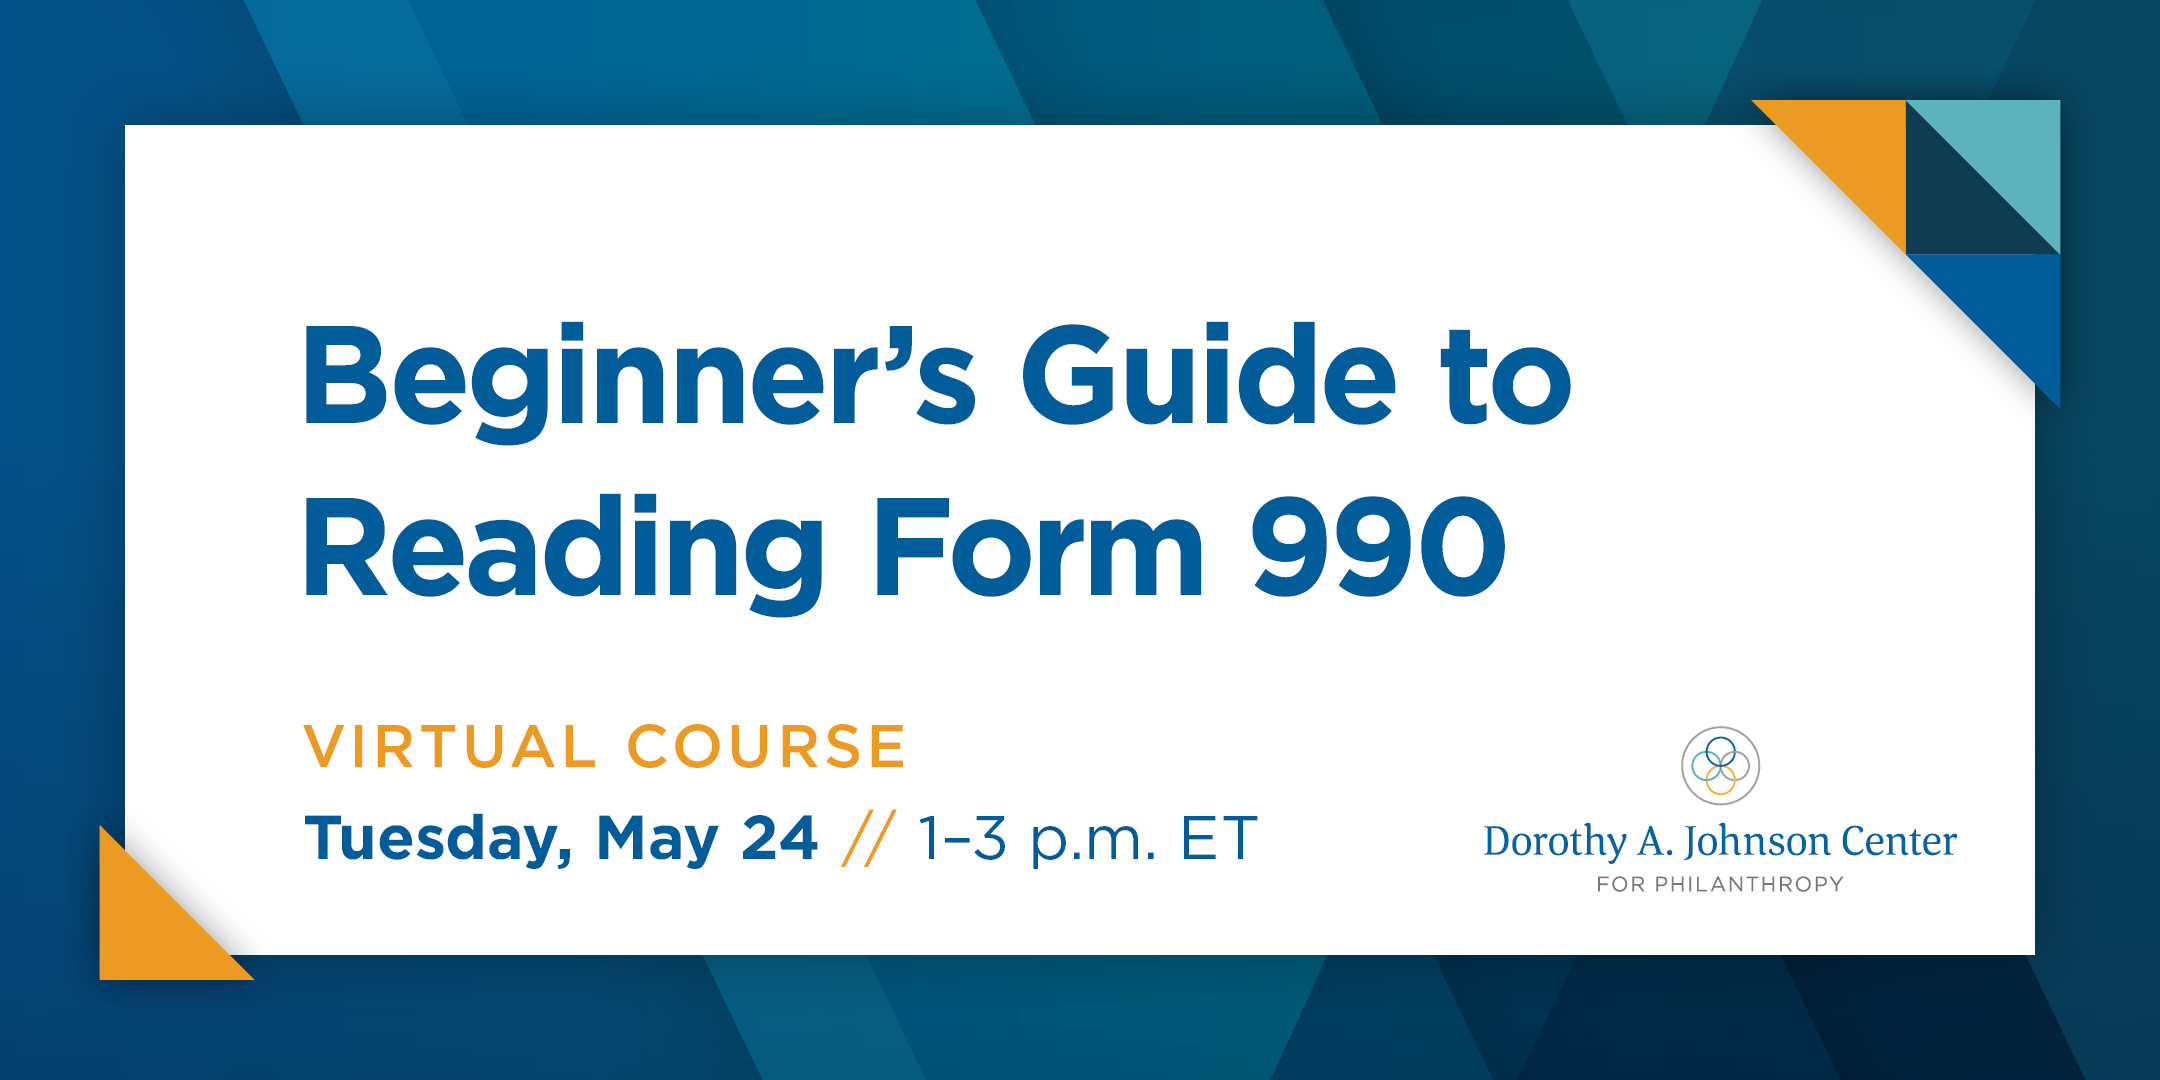 Beginner's Guide to Reading Form 990